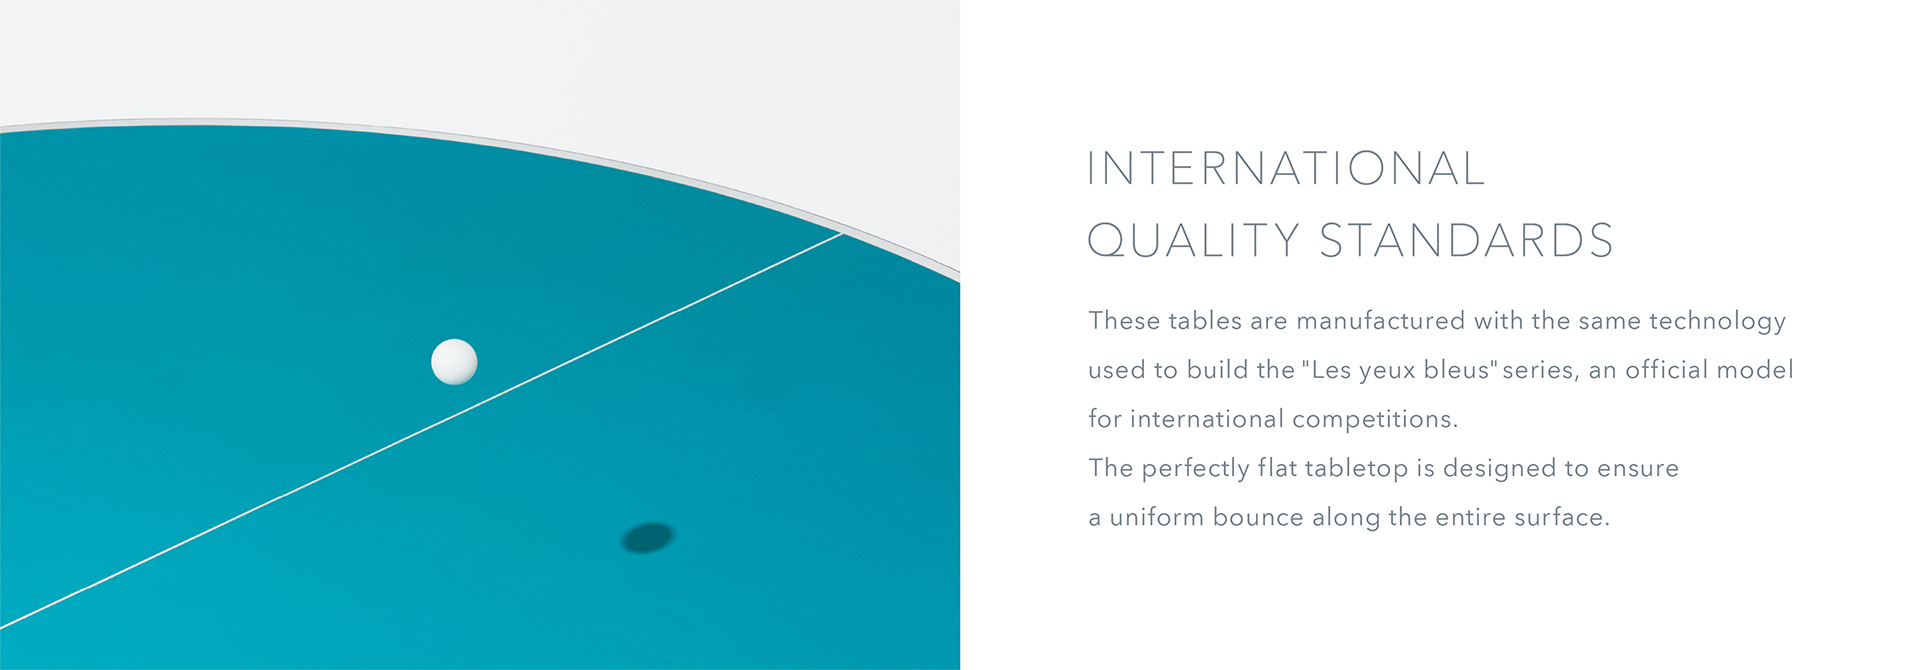 International Quality Standards These tables are manufactured with the same technology used to build the “Les yeux bleus" series, an official model for international competitions. The perfectly flat tabletop is designed to ensure a uniform bounce along the entire surface.